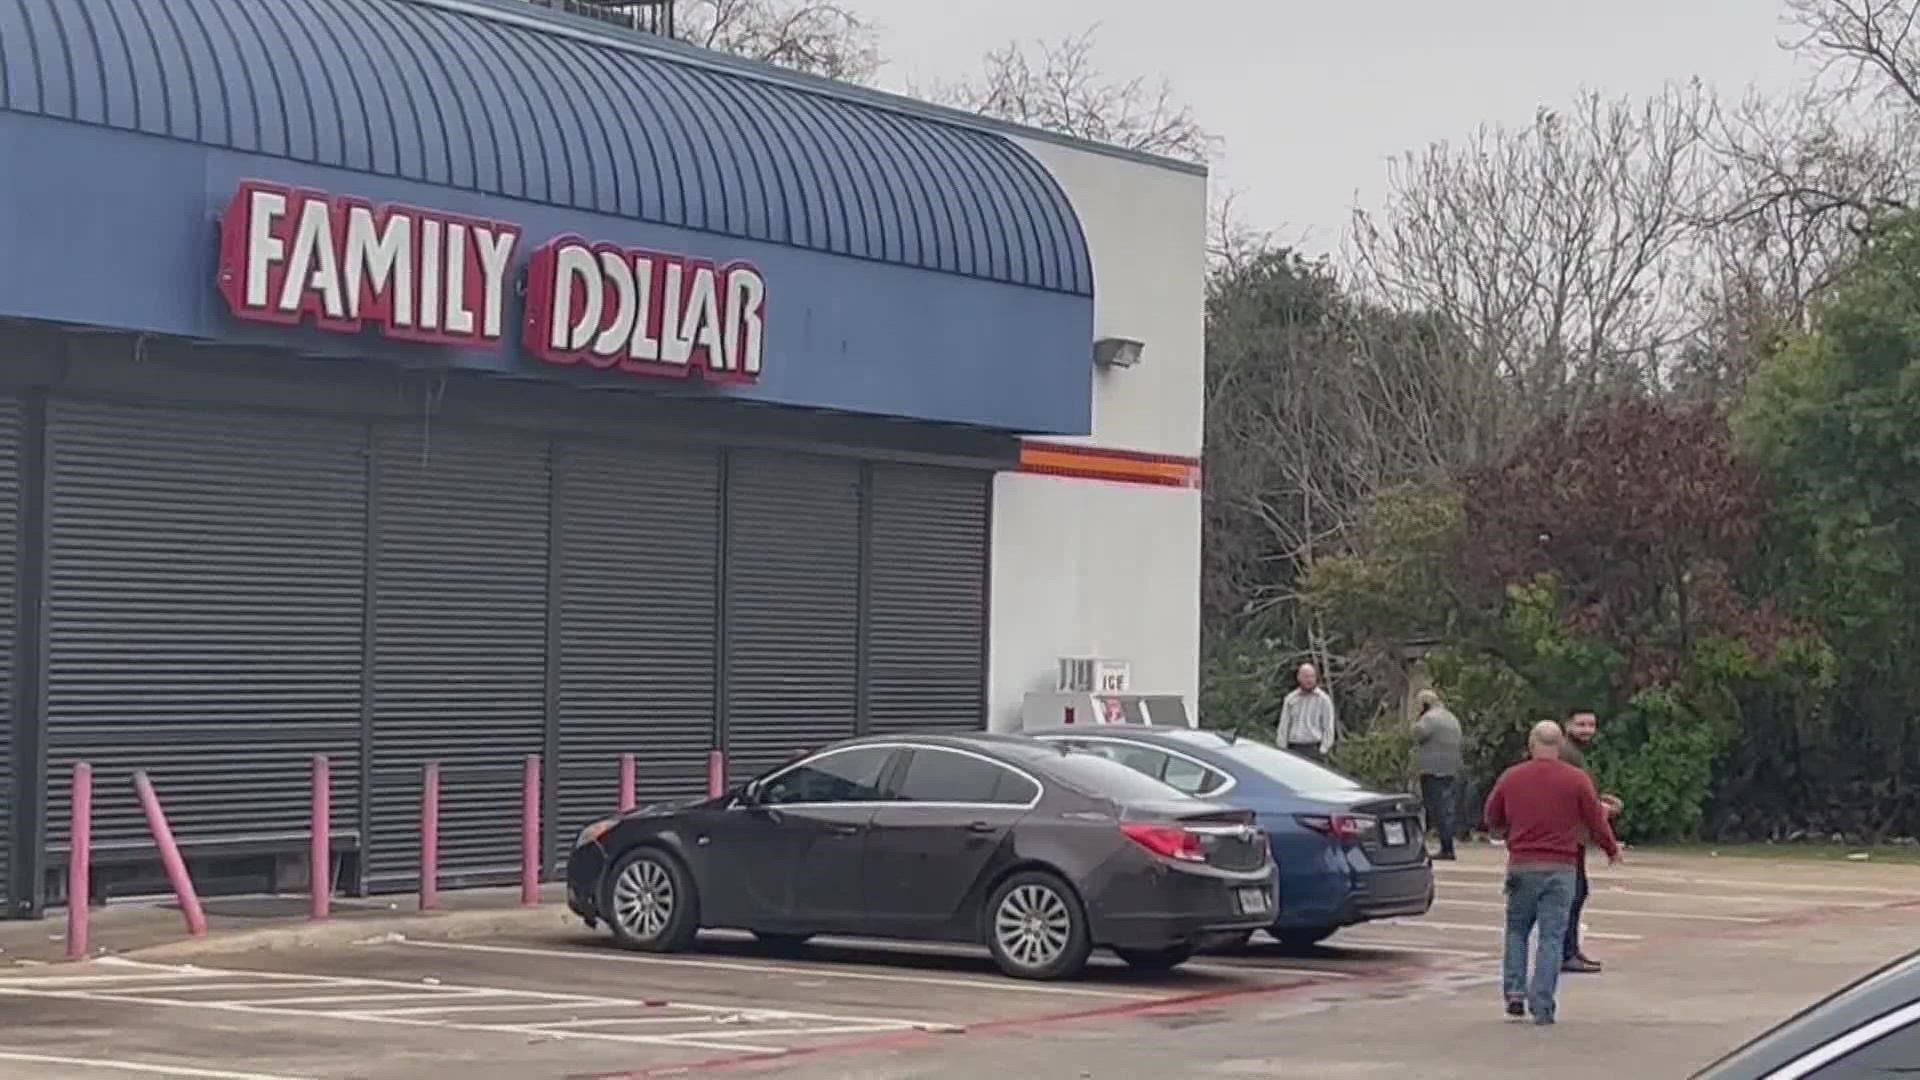 Police say a suspect has been arrested in connection to the death of a Family Dollar store employee in Dallas.